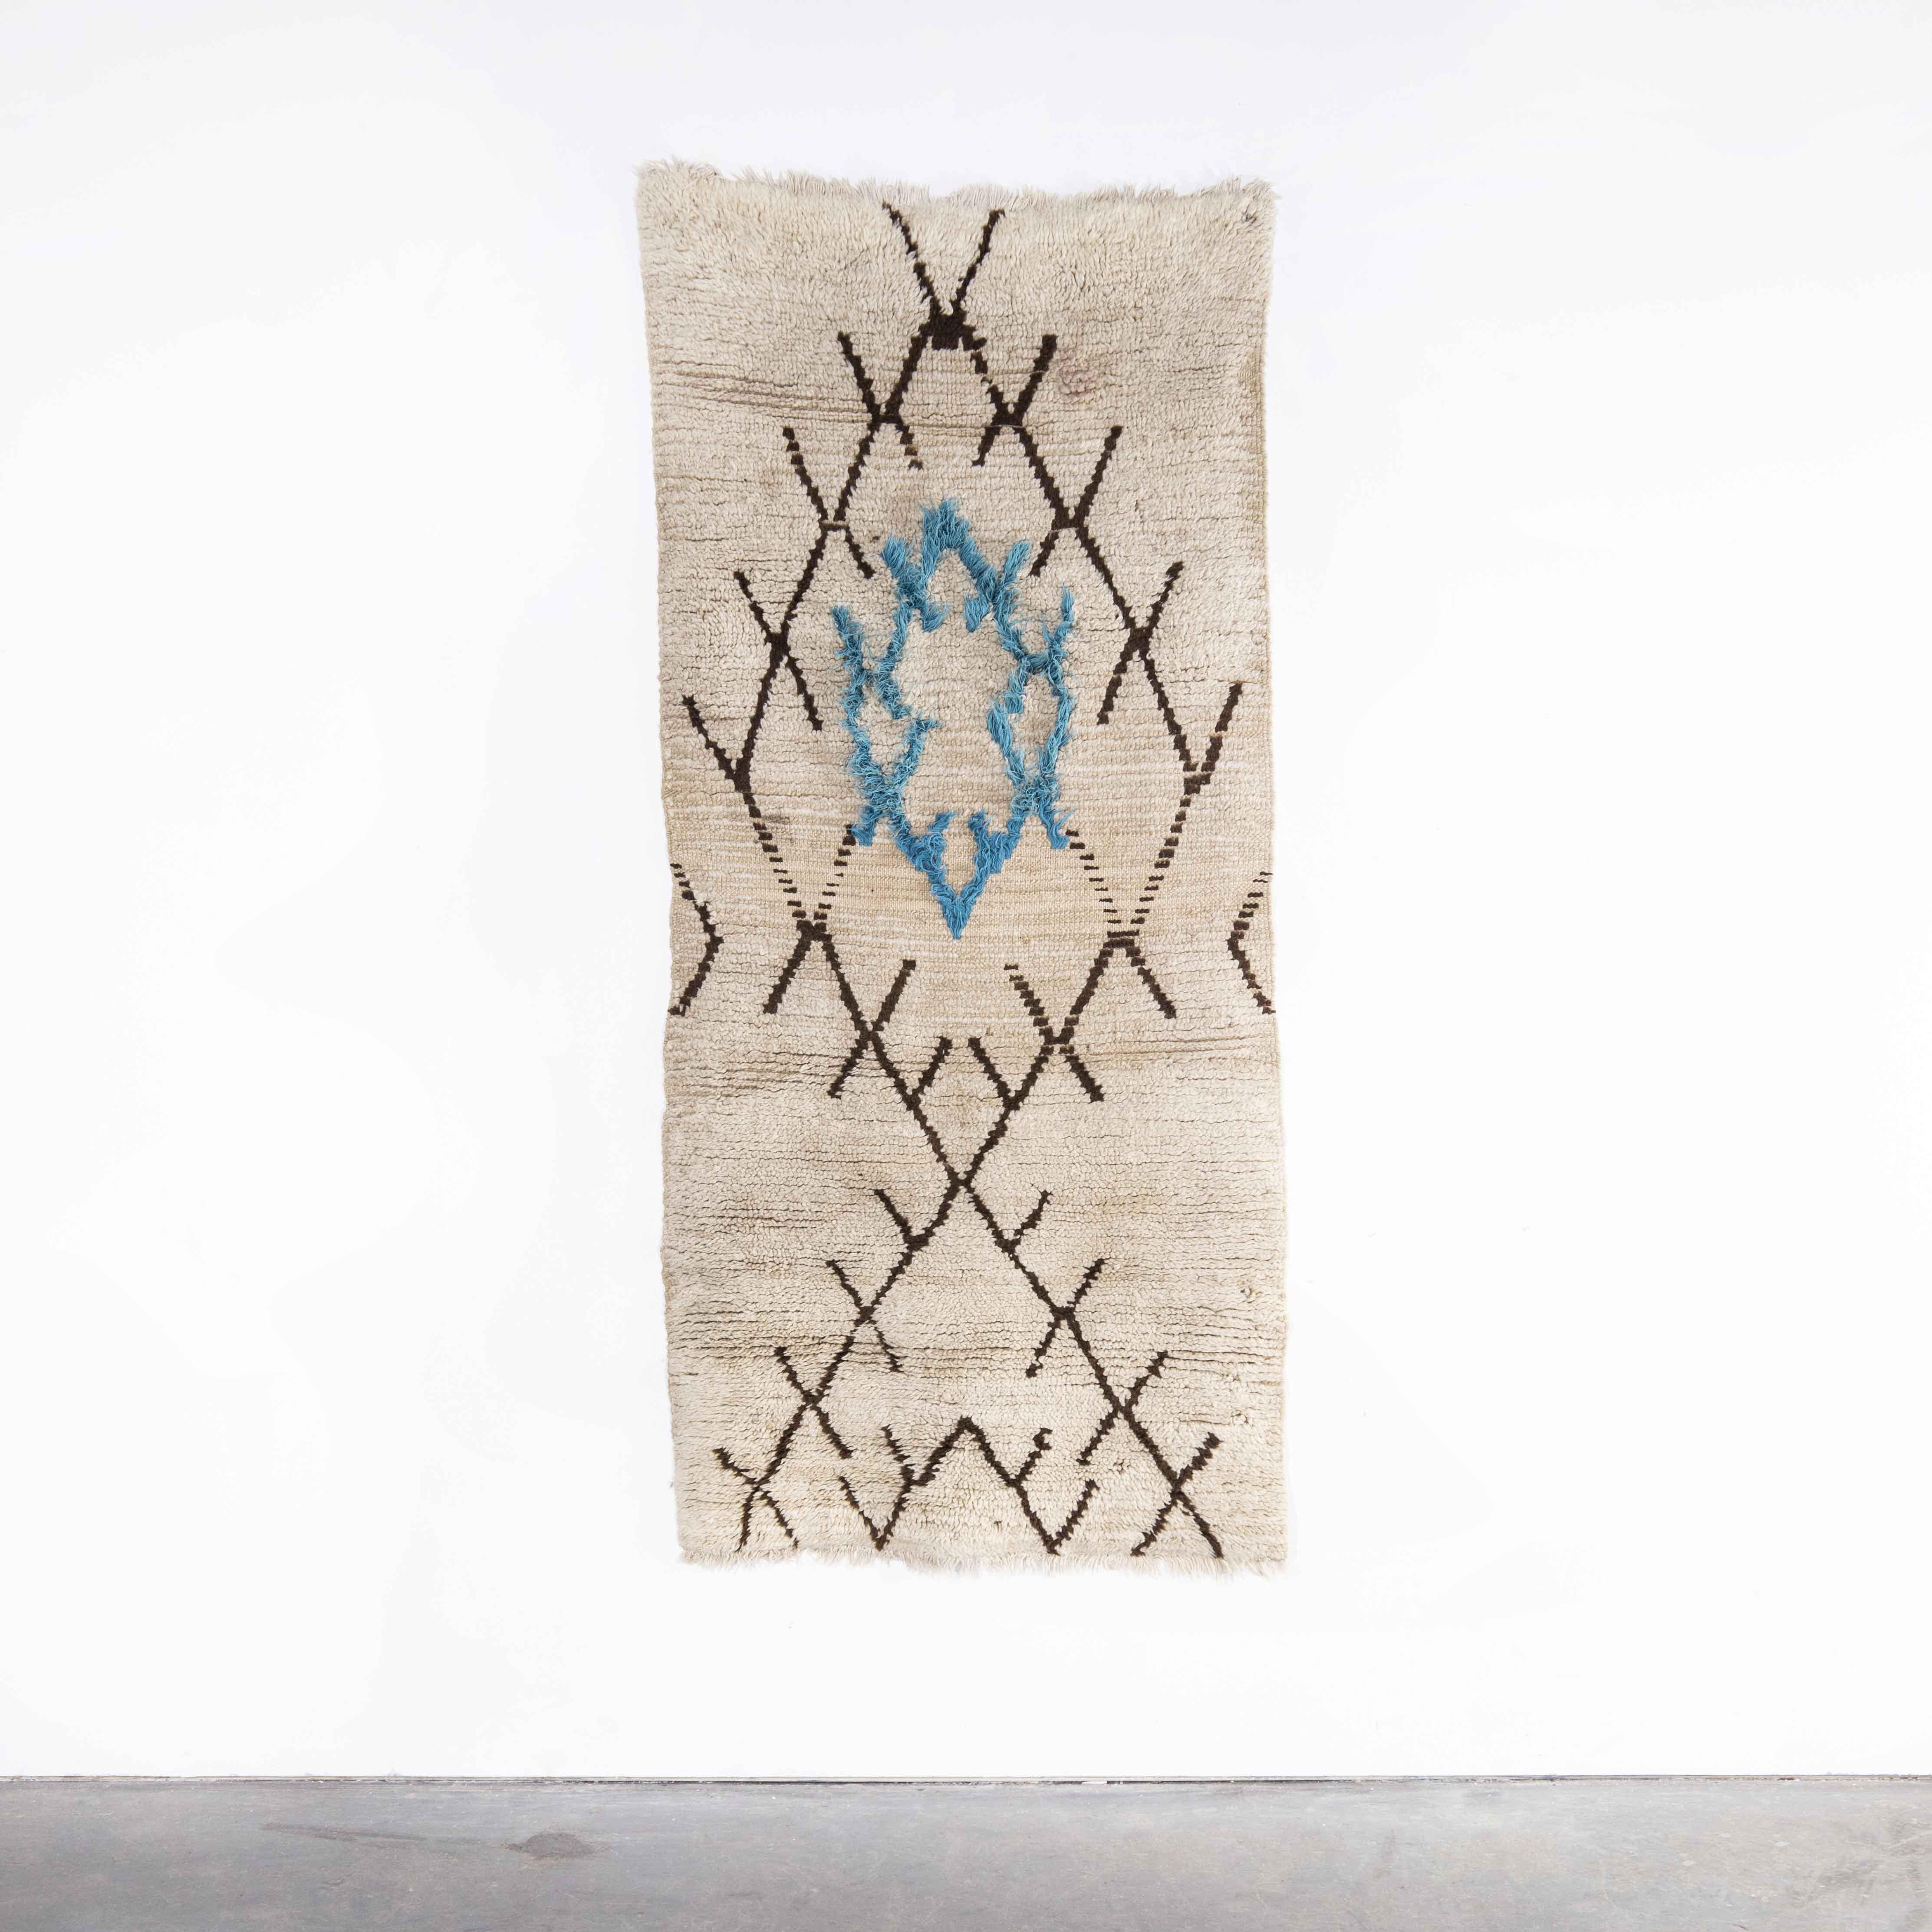 Vintage Berber Azilal Monochromatic Diamond Graphic Rug
Vintage Berber Azilal Monochromatic Diamond Graphic Rug. Azilal rugs are the most exuberant and colourful of Berber rugs, Diamonds shapes and strong lines play heavily into the design of Azilal